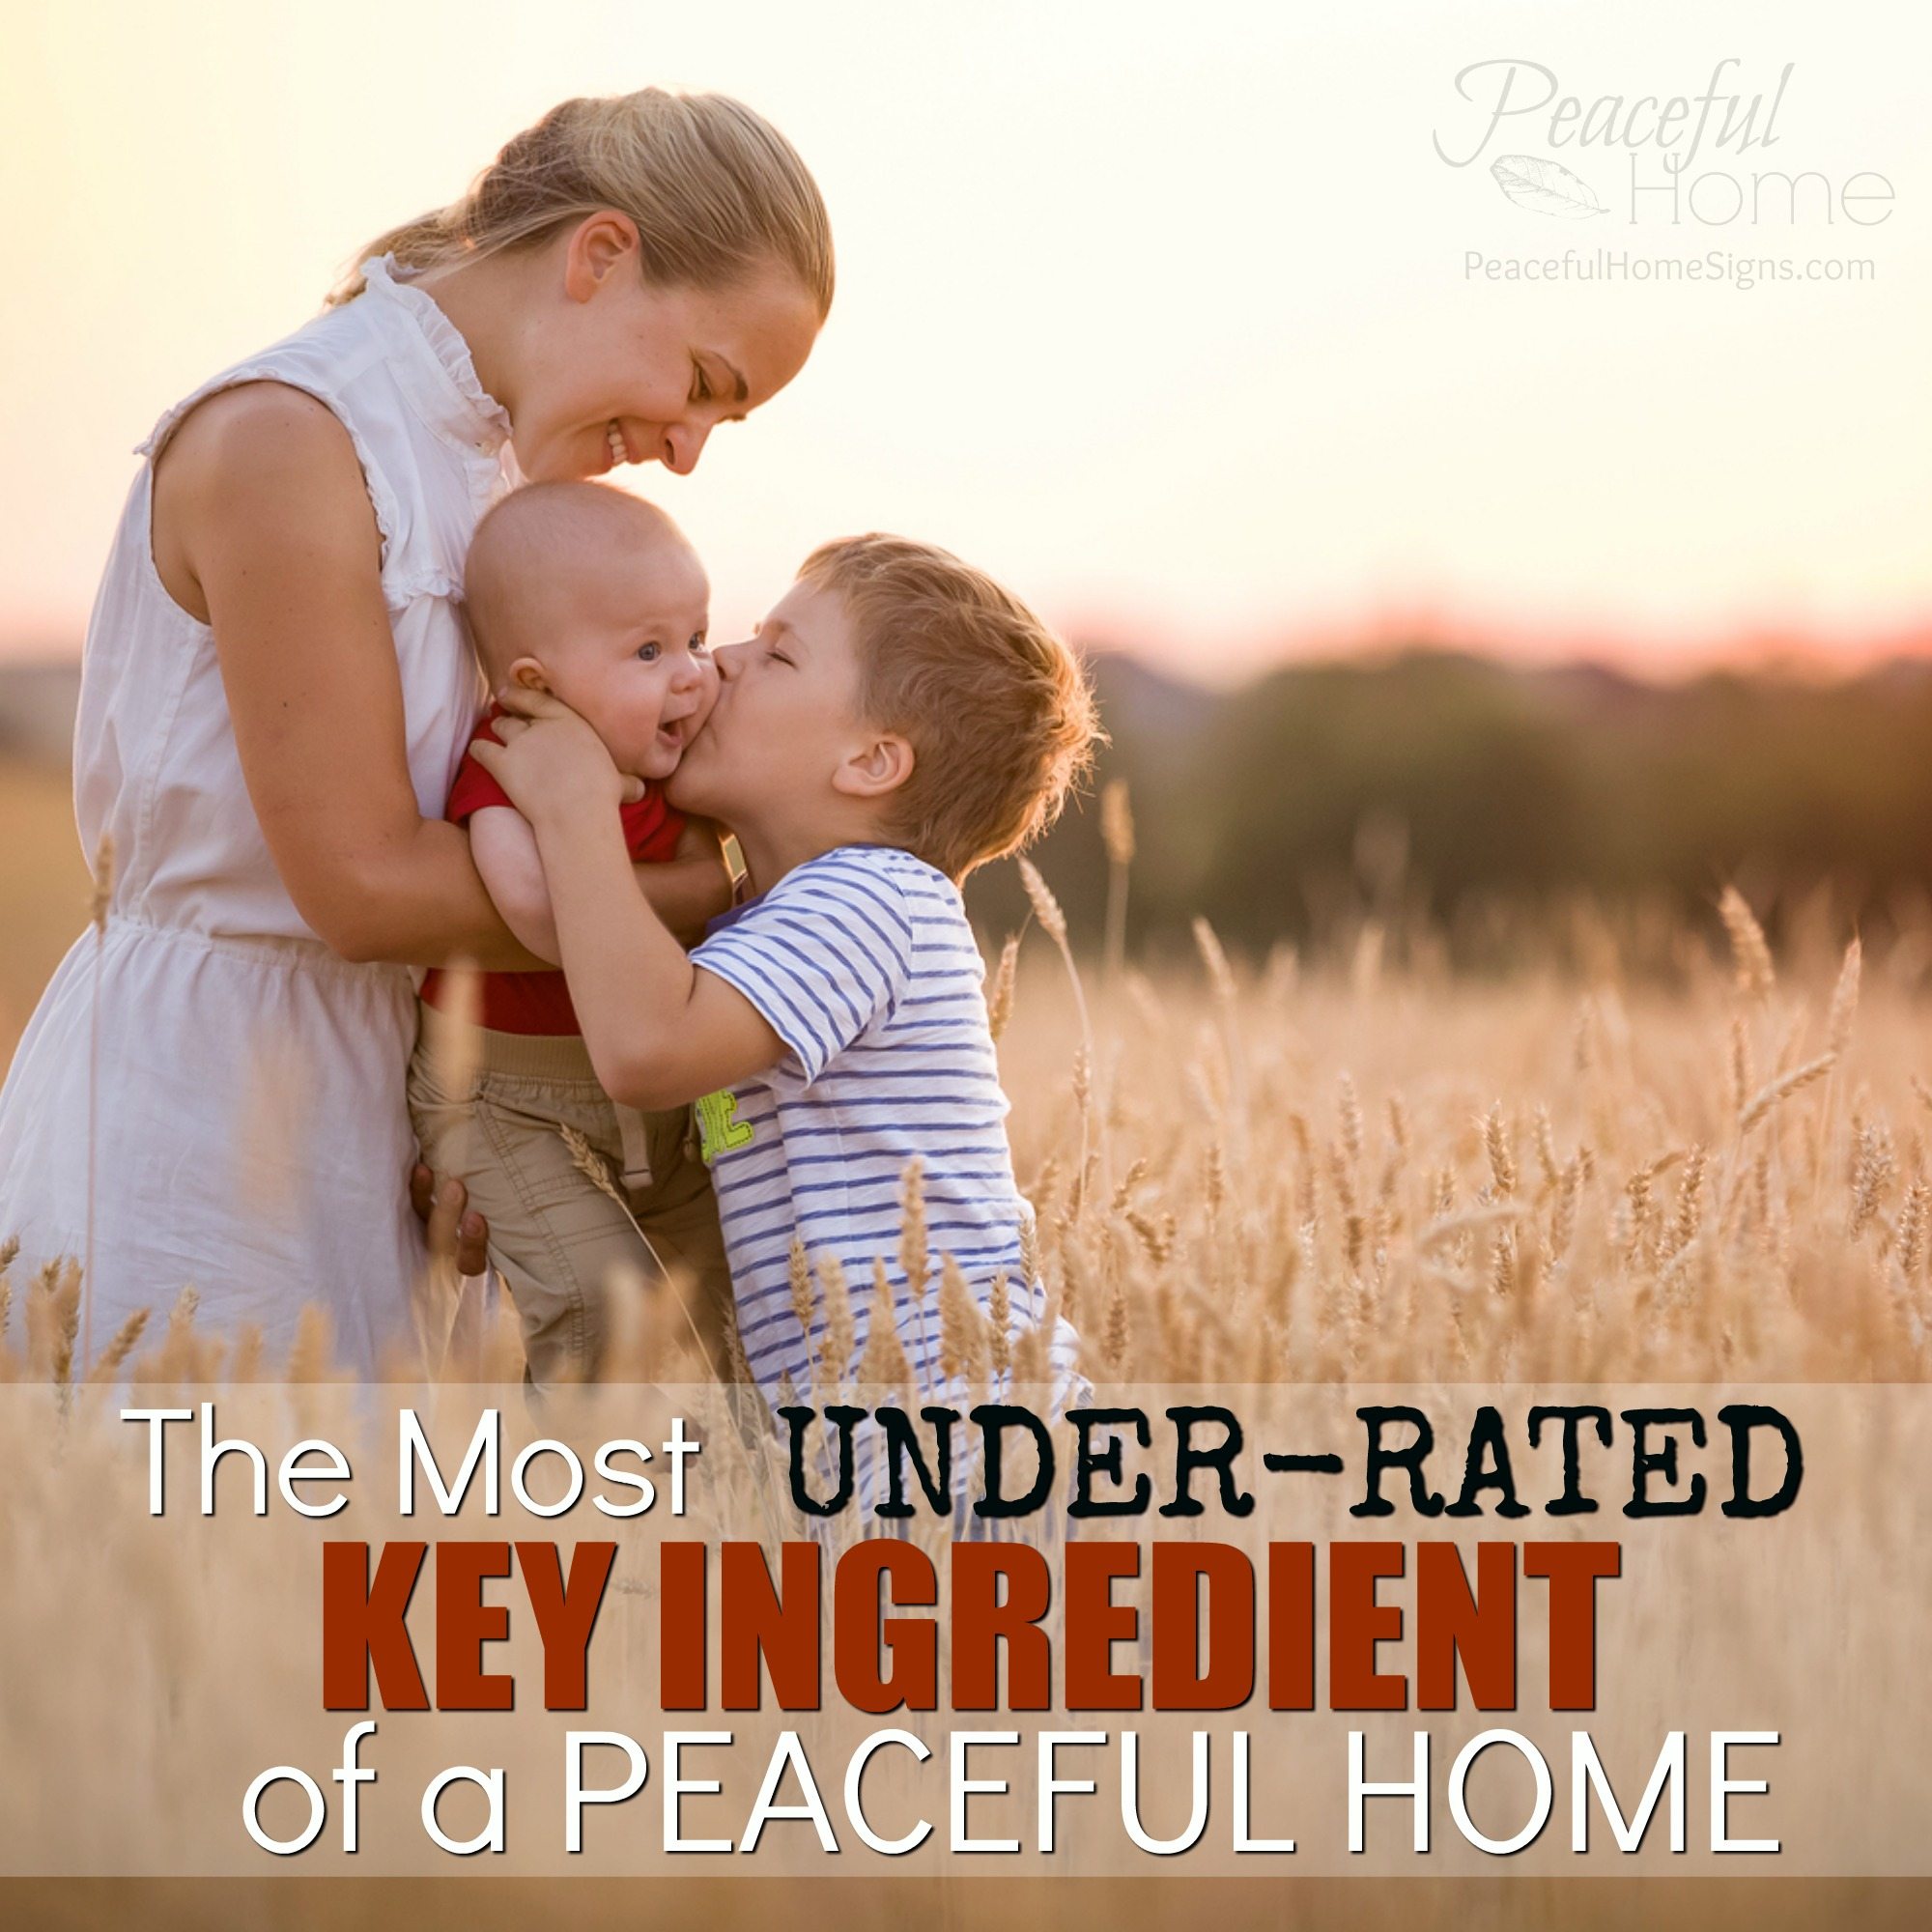 The Most Underrated KEY Ingredient of a Peaceful Home